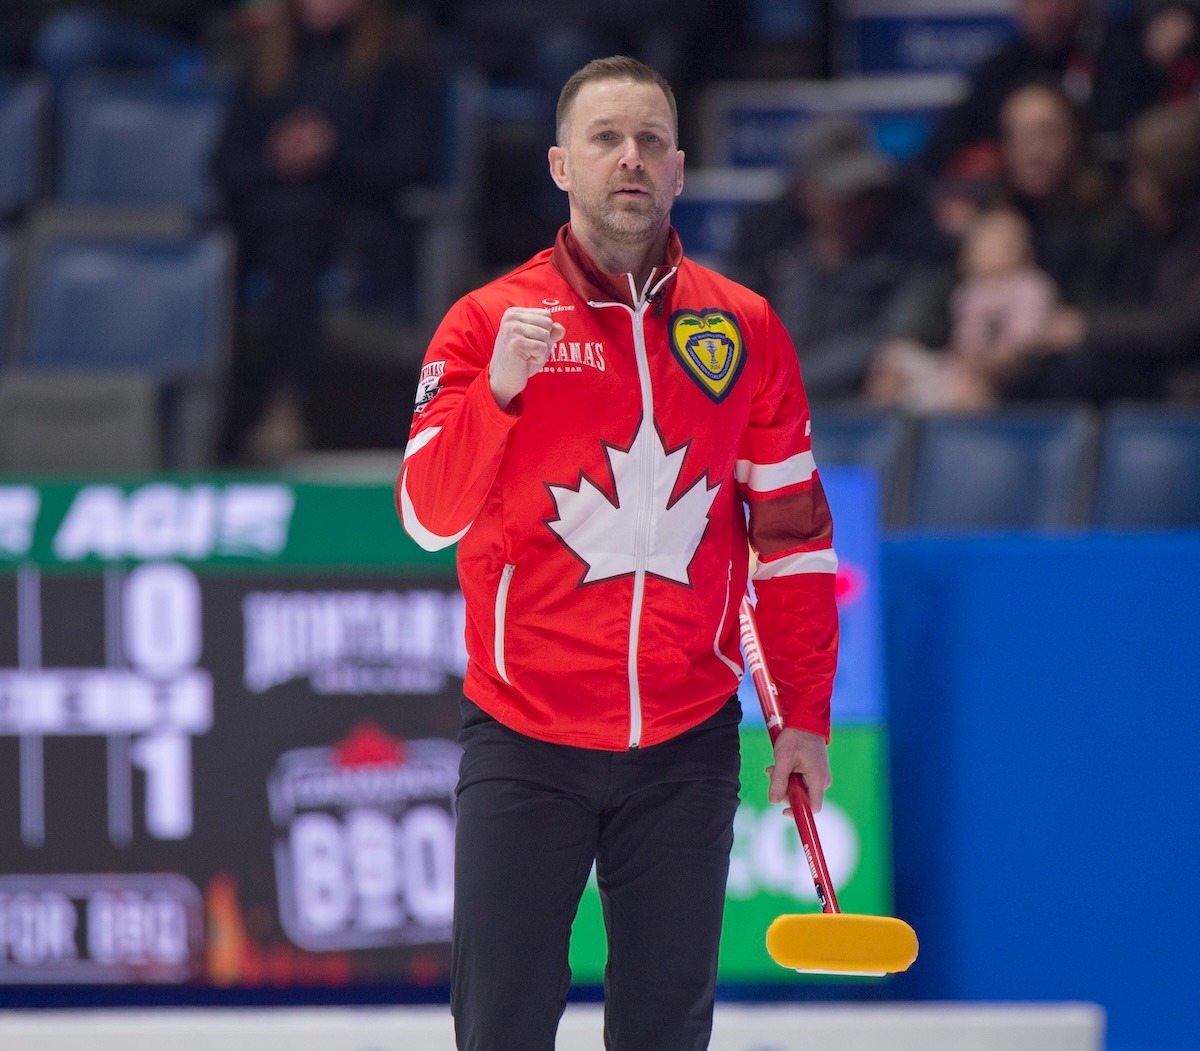 TEAM CANADA SECURES SECOND PLACE IN POOL B